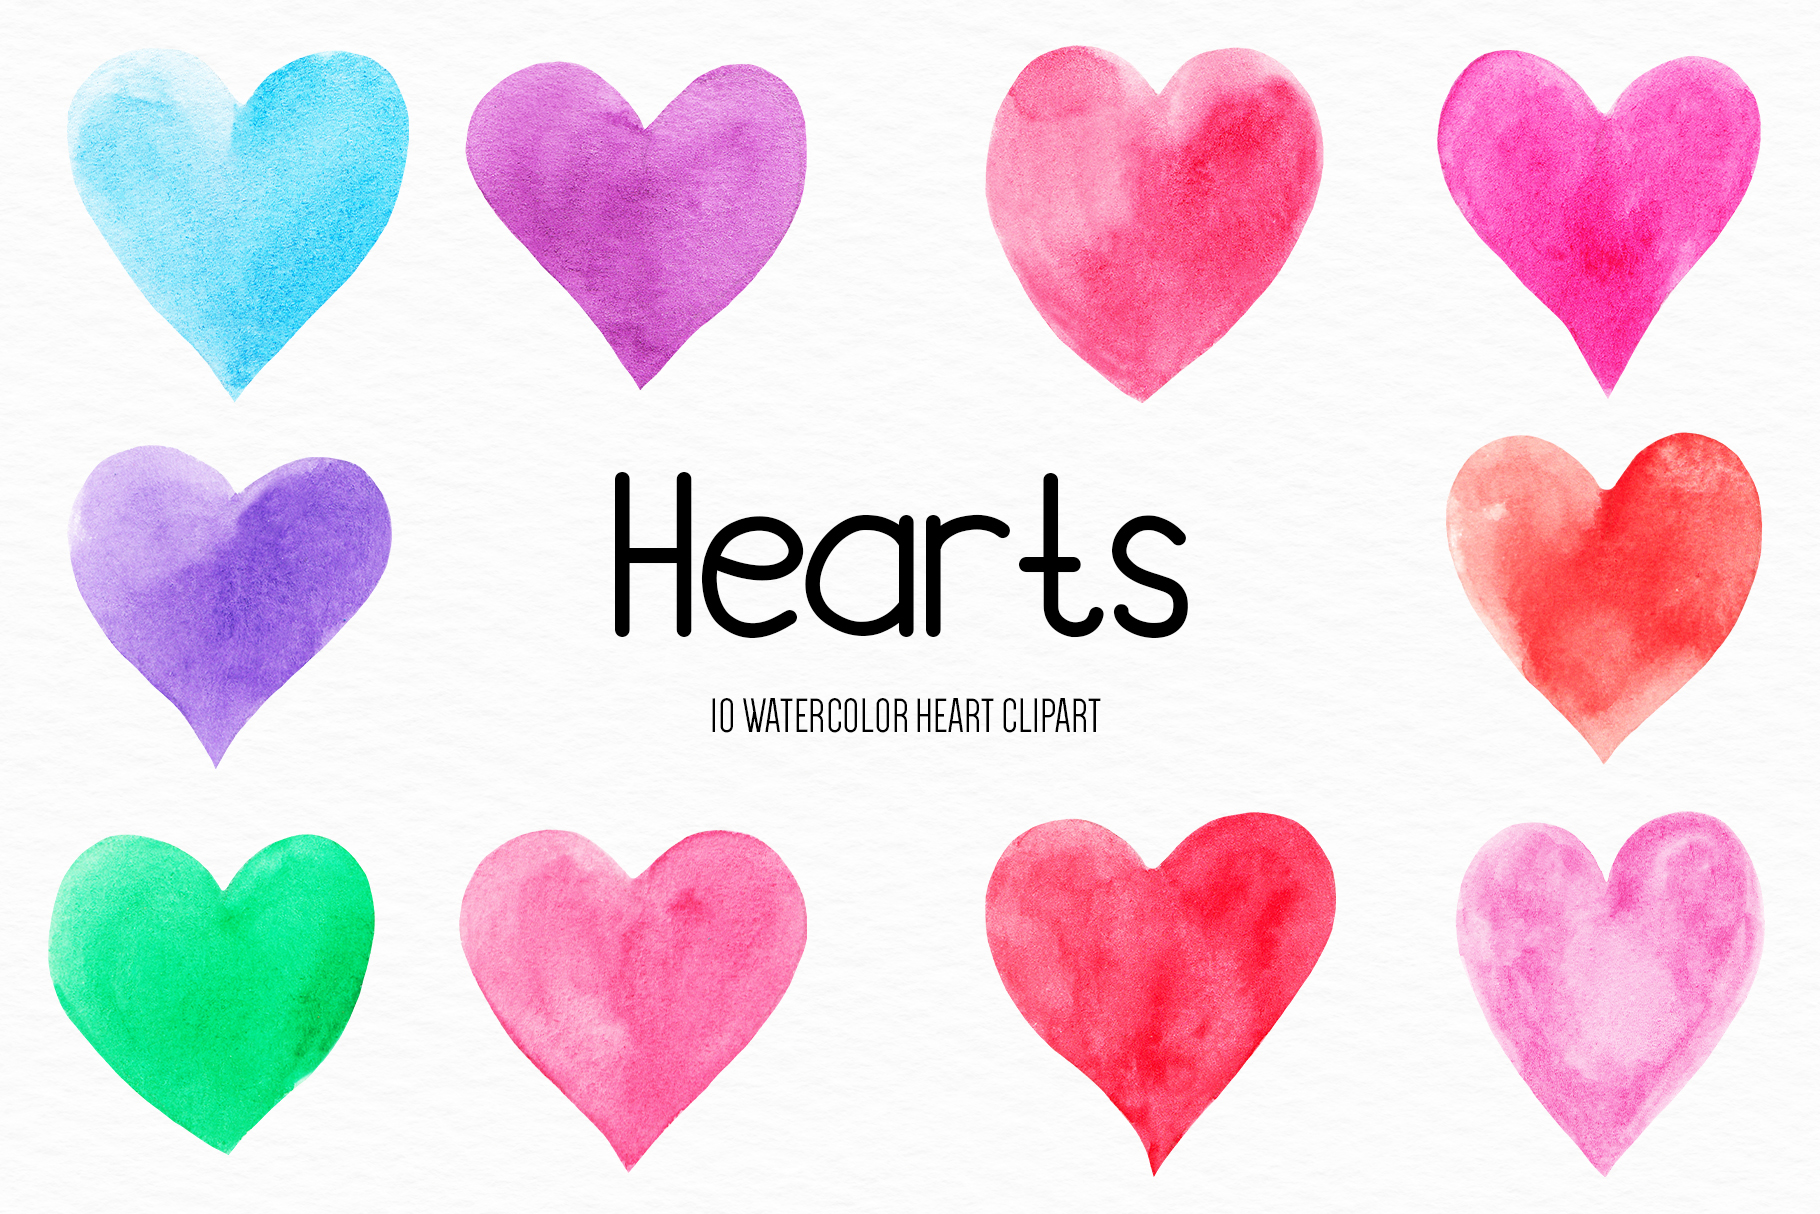 Watercolor Heart Cliparts, Stock Vector and Royalty Free Watercolor Heart  Illustrations